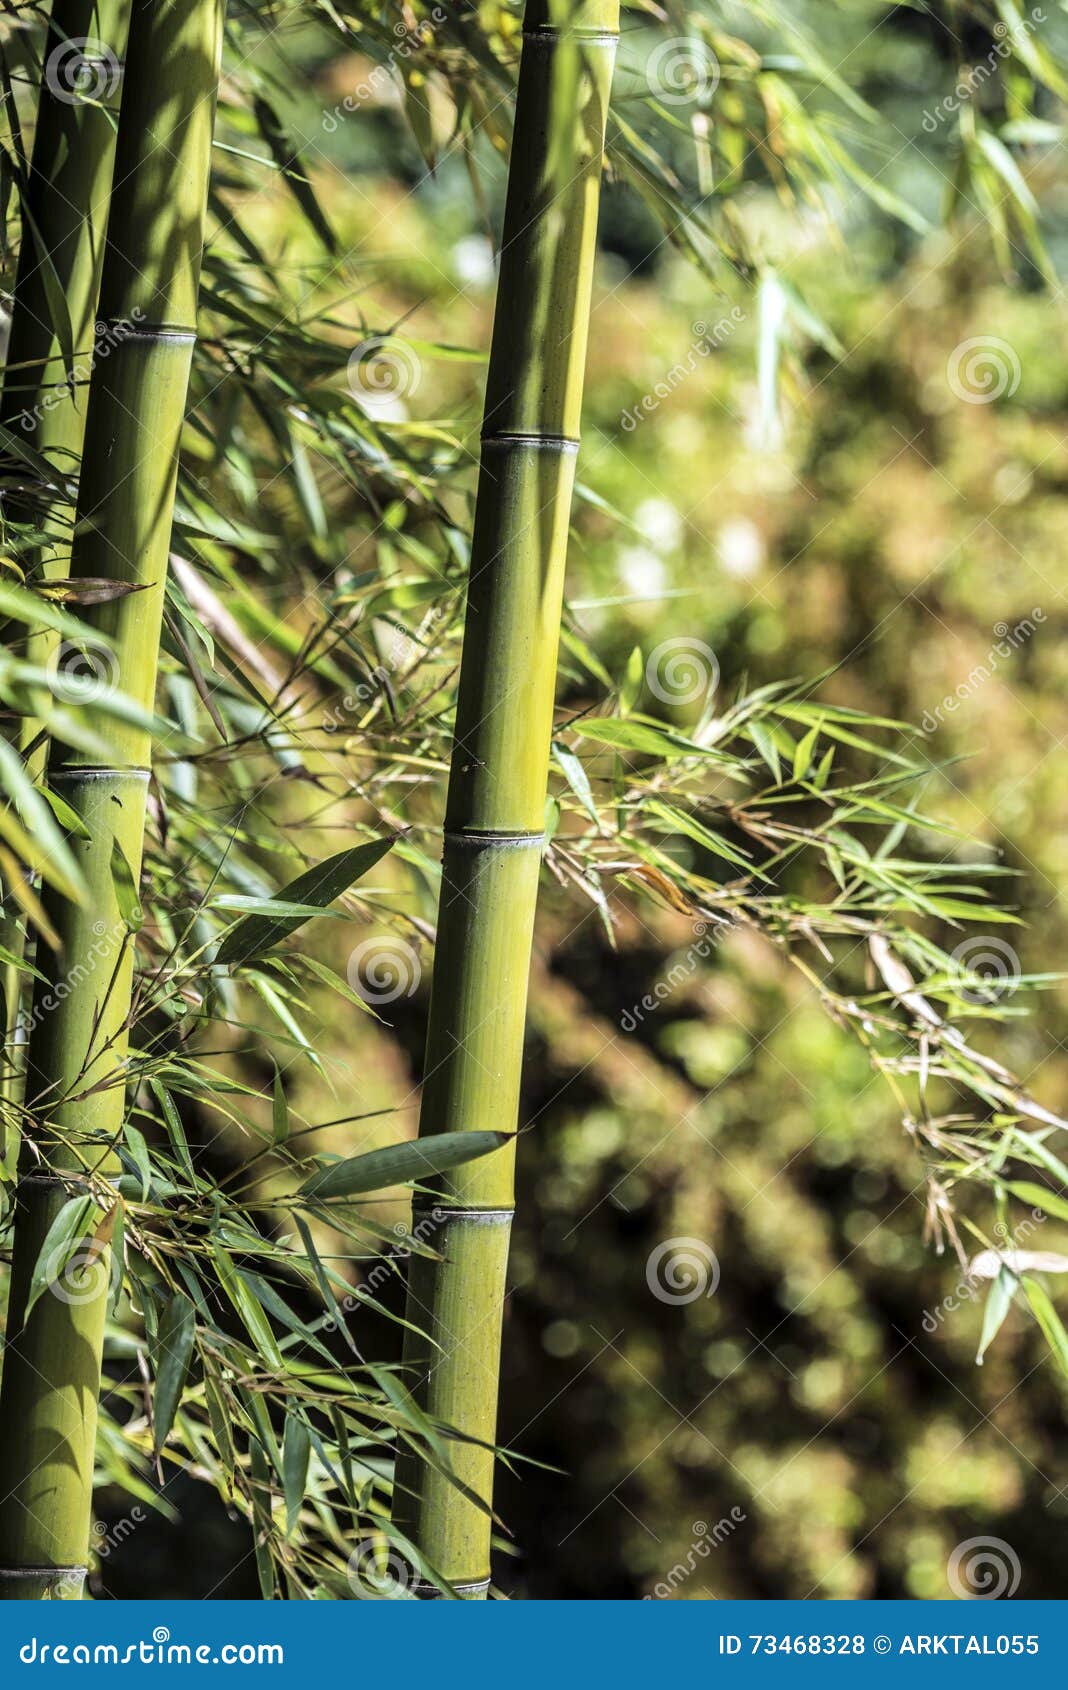 Green bamboo cane 3 stock photo. Image of life, growth - 73468328